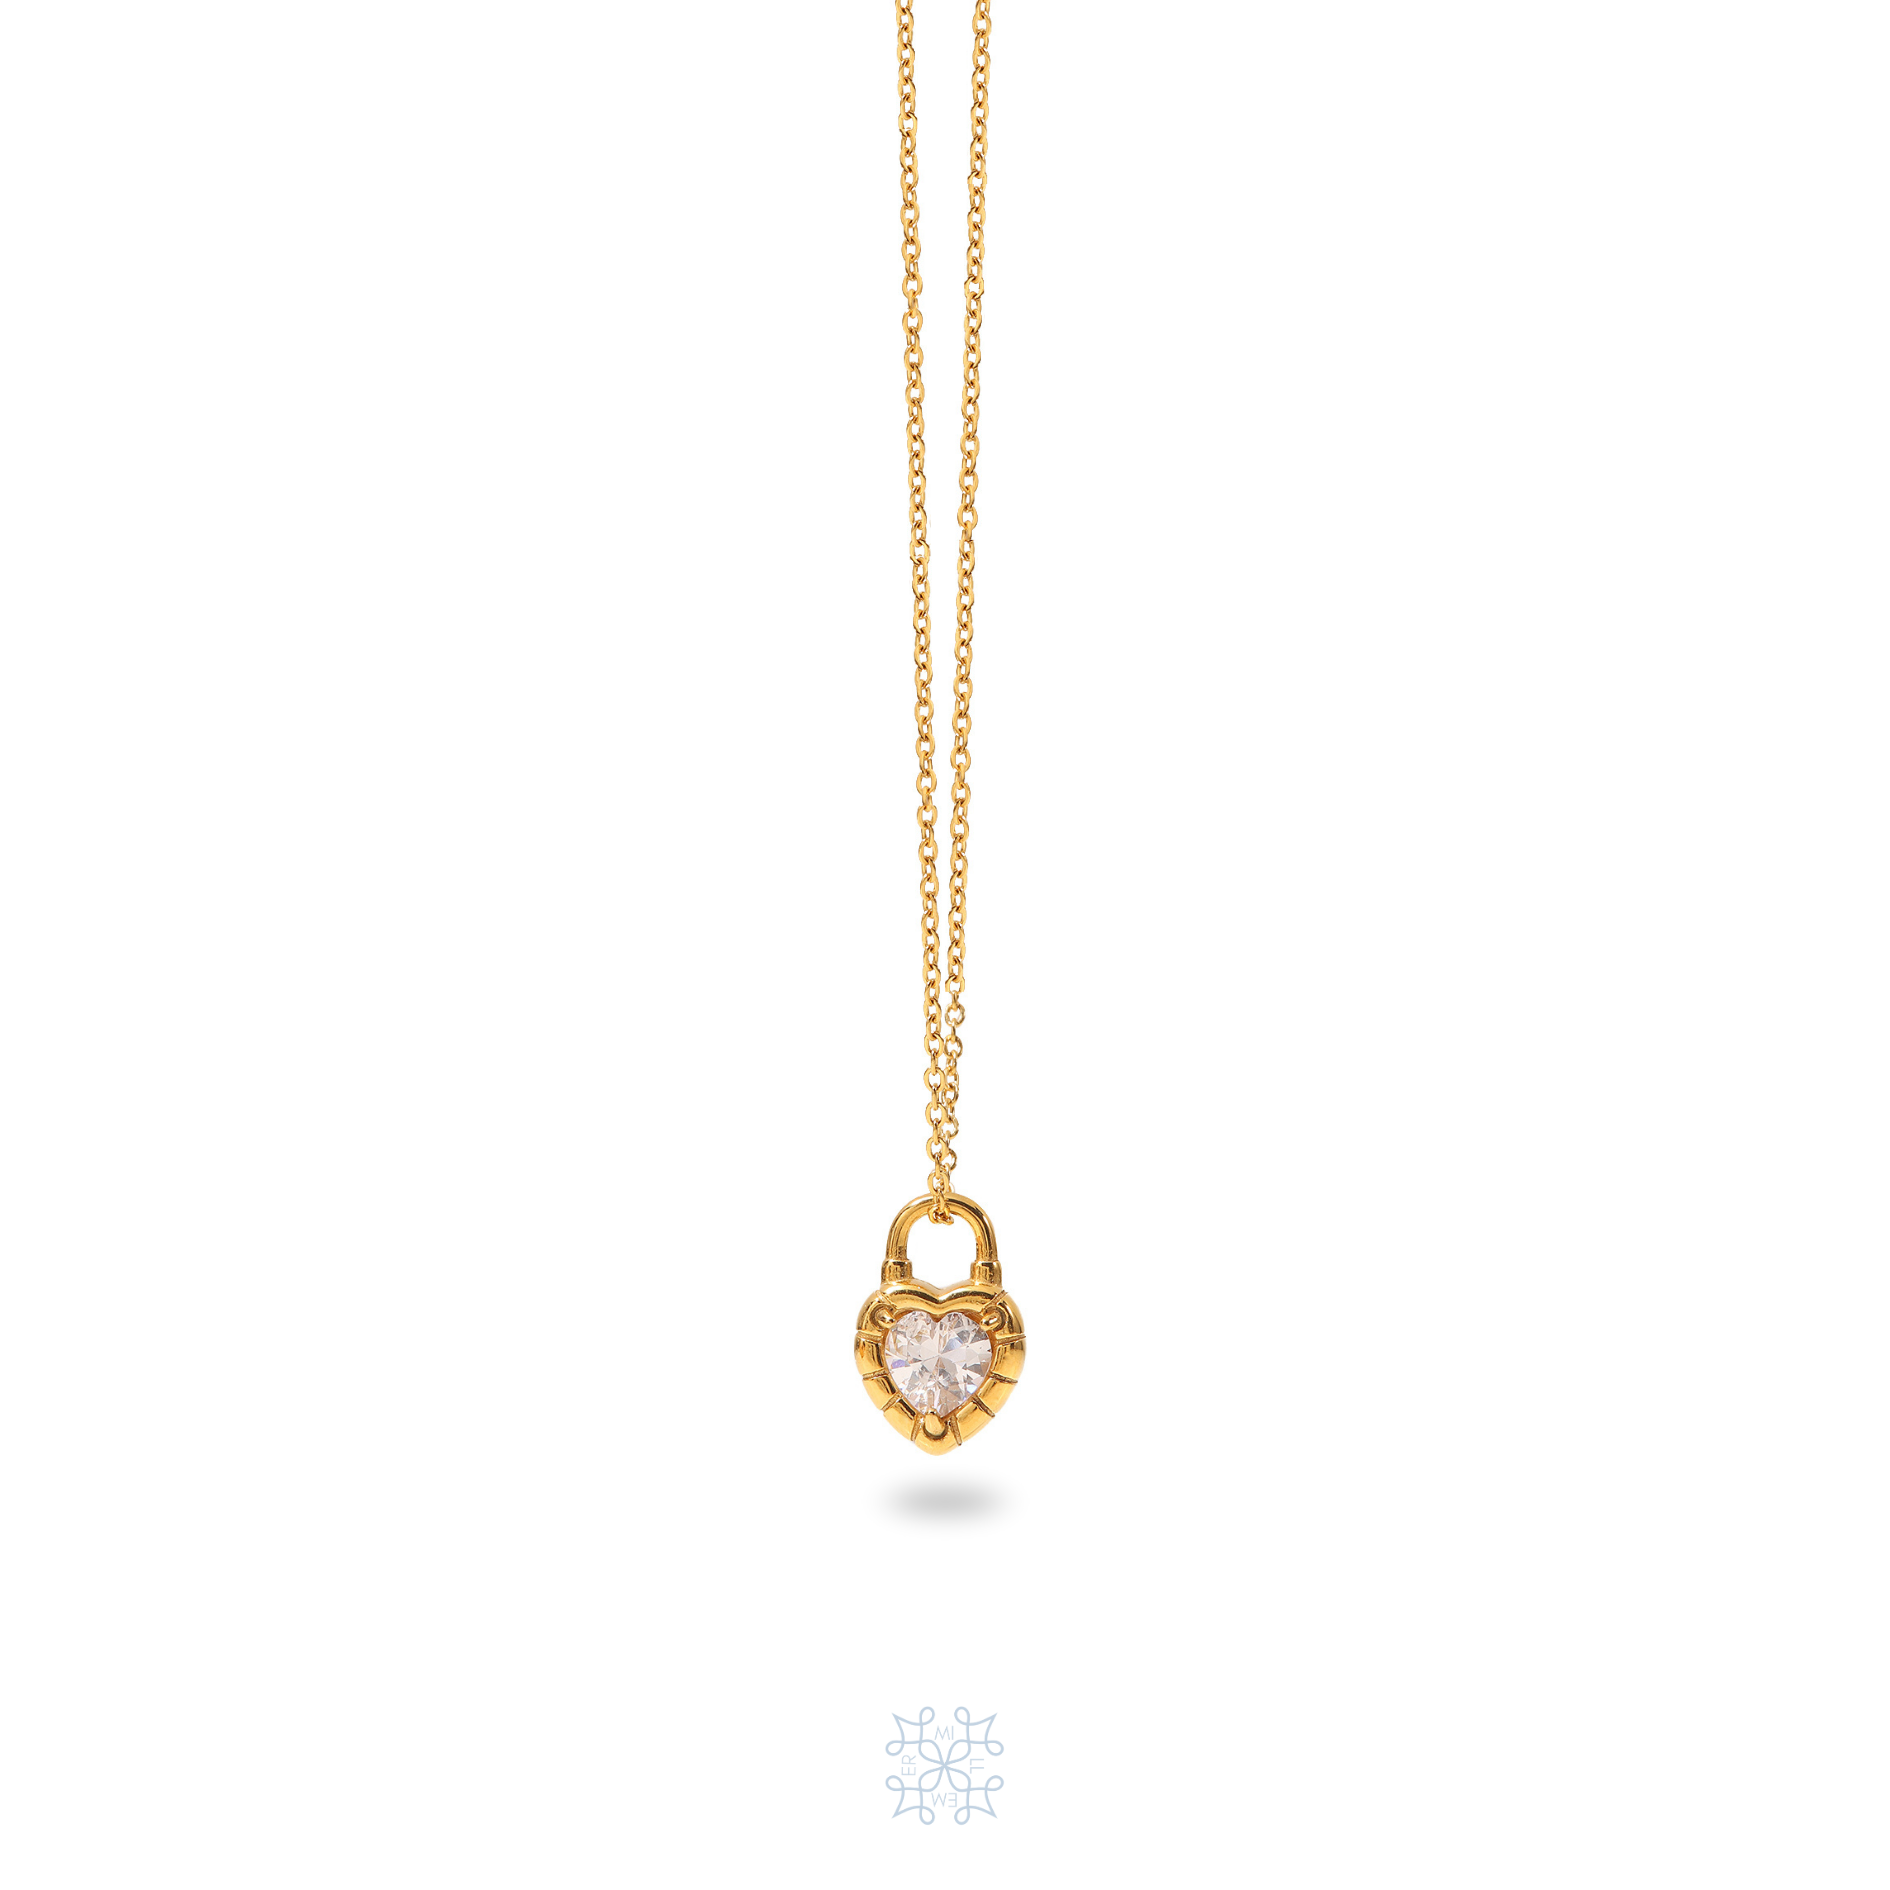 HEARTLOCK Zircon Pendant Gold Necklace. Gold chain with a locker pendnat in the form of a heart. In the middle of the gold heart pendnat is a white zircon stone.